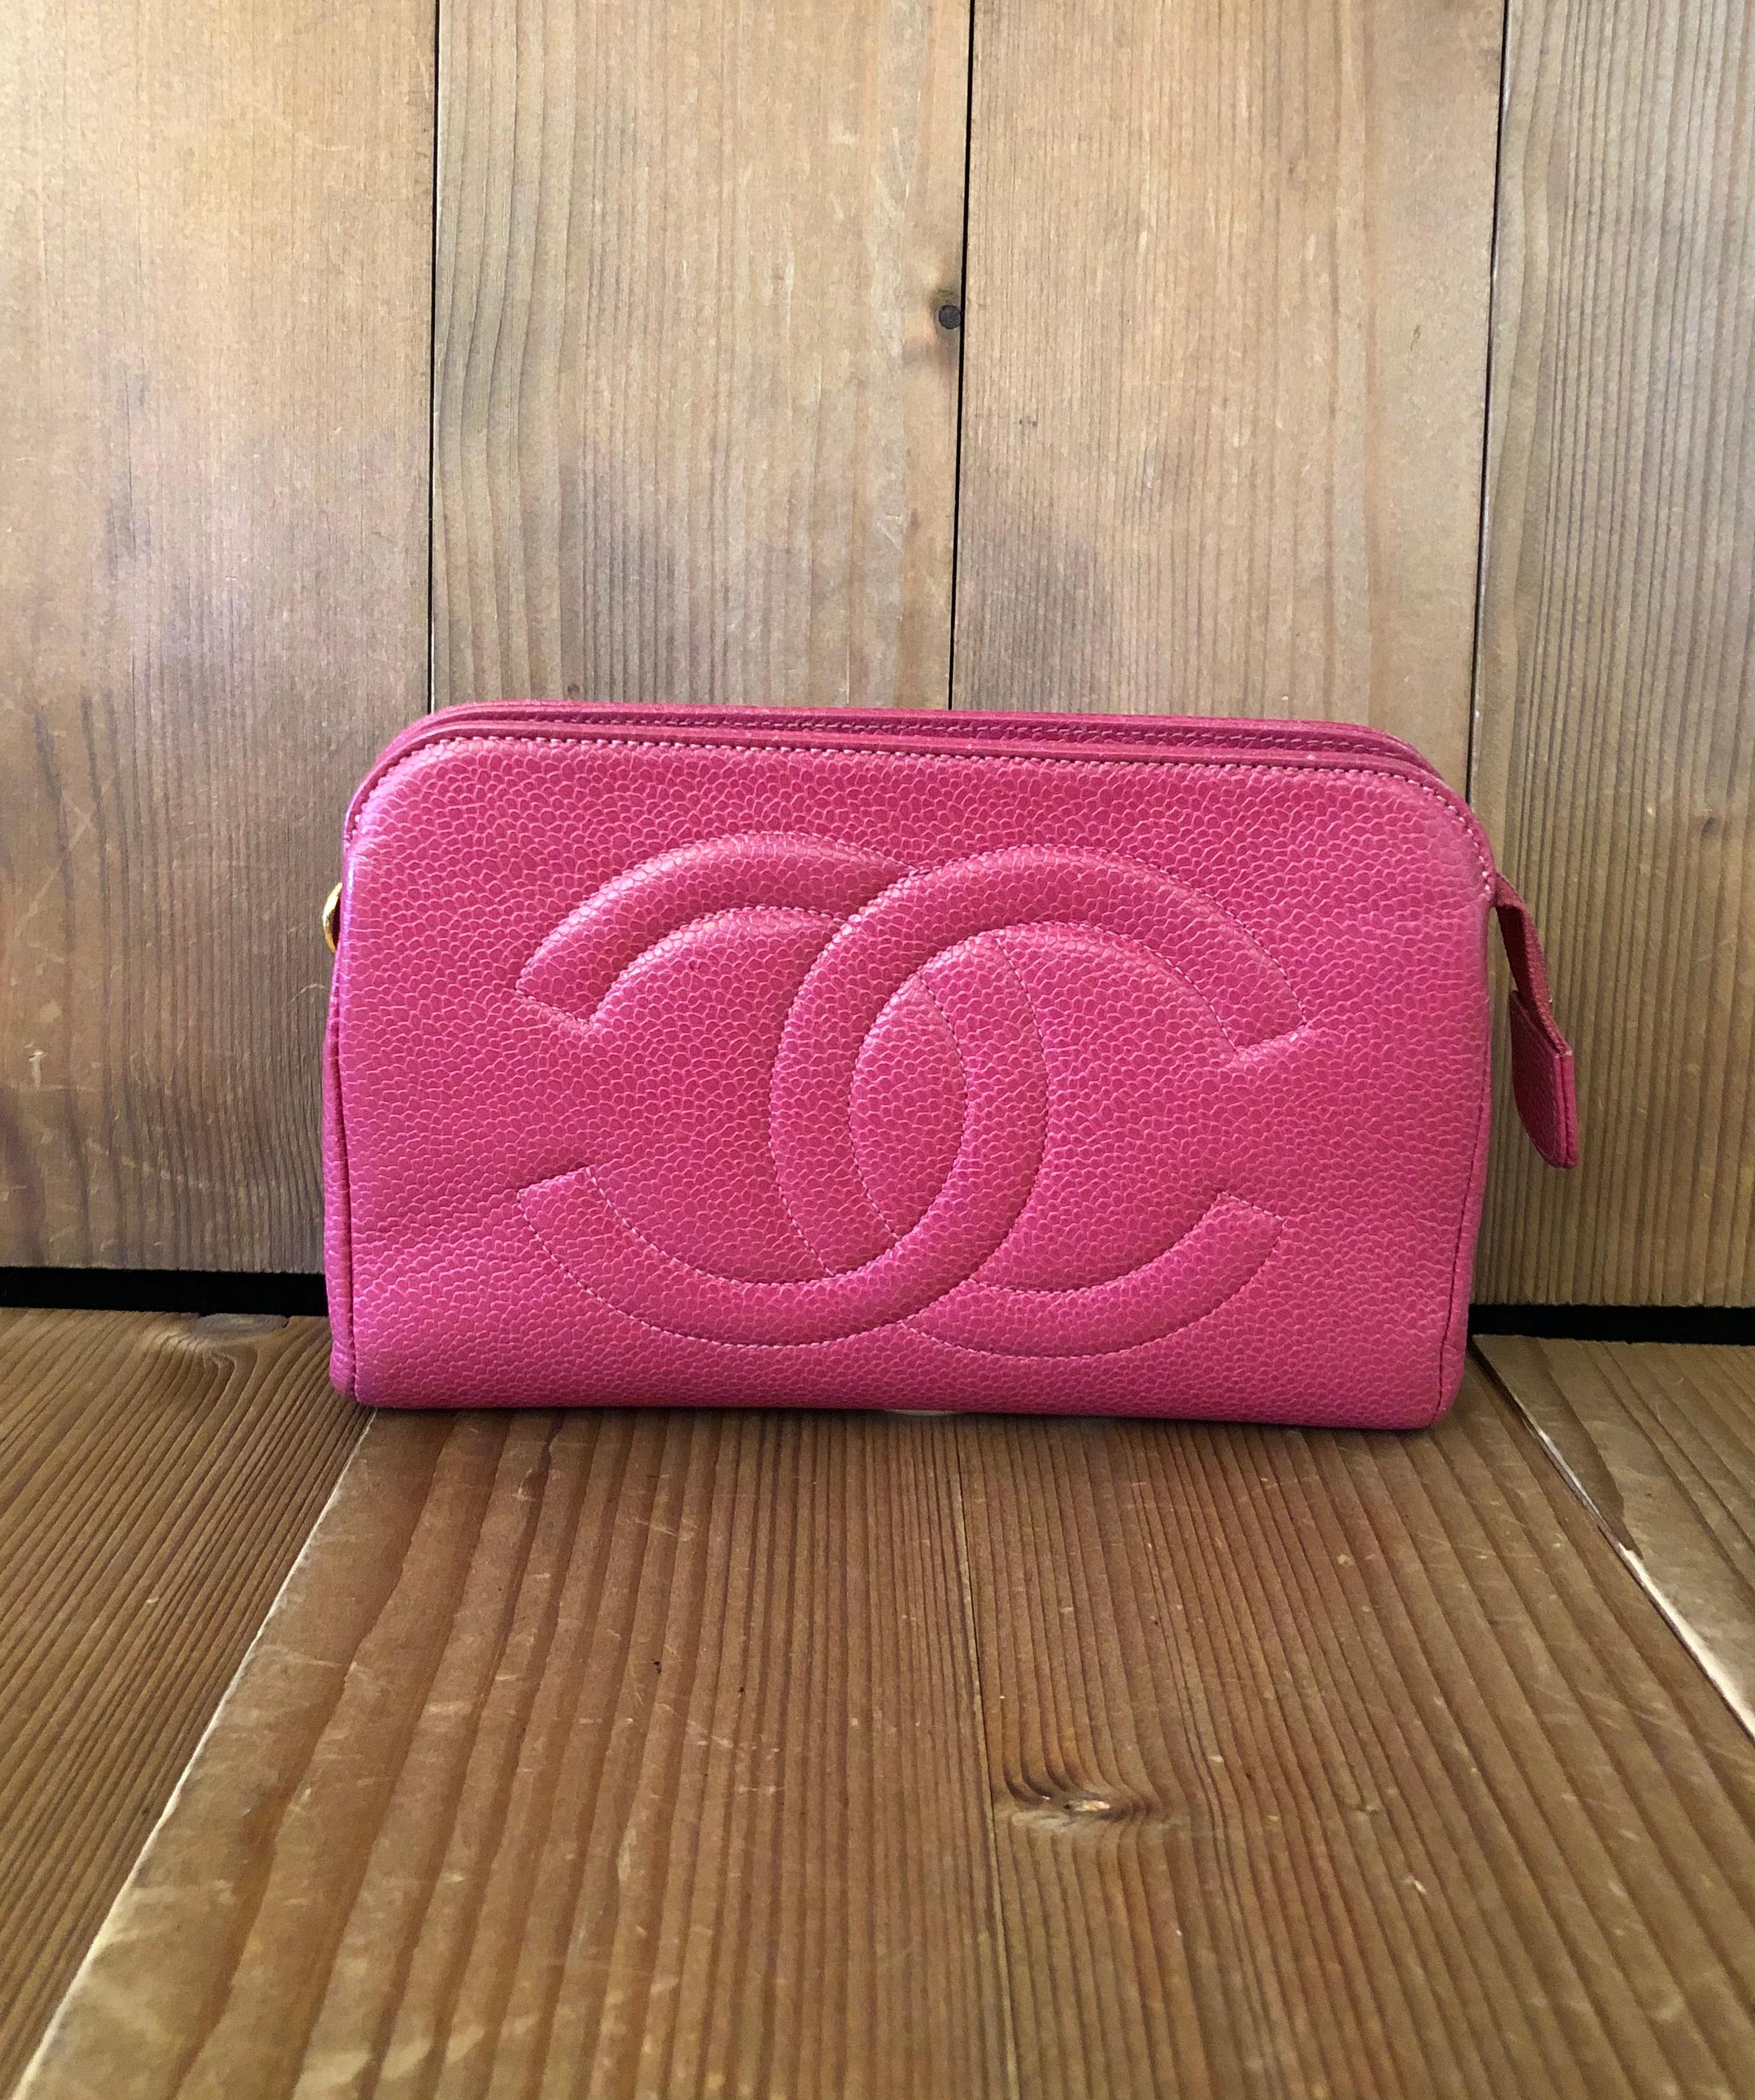 Women's or Men's Vintage CHANEL Pink Caviar Leather Pouch Bag Clutch Bag (Altered)